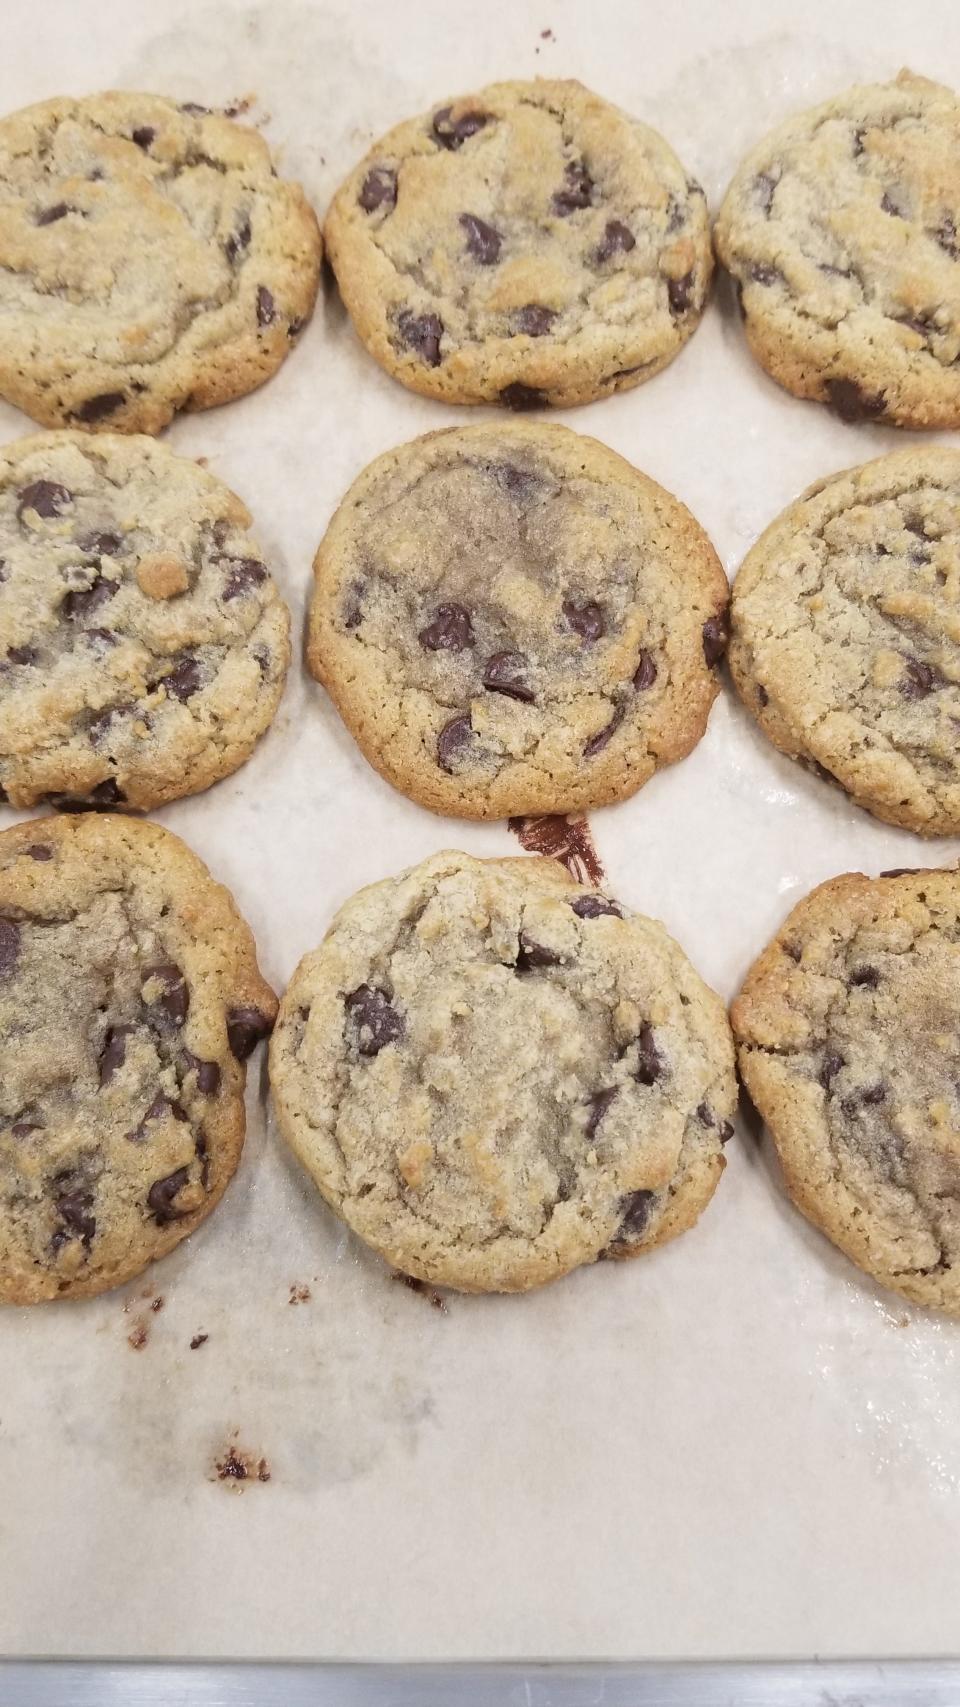 Chocolate chip cookies fresh out of the oven at Dulce D Leche, which has locations in Framingham and Ashland.